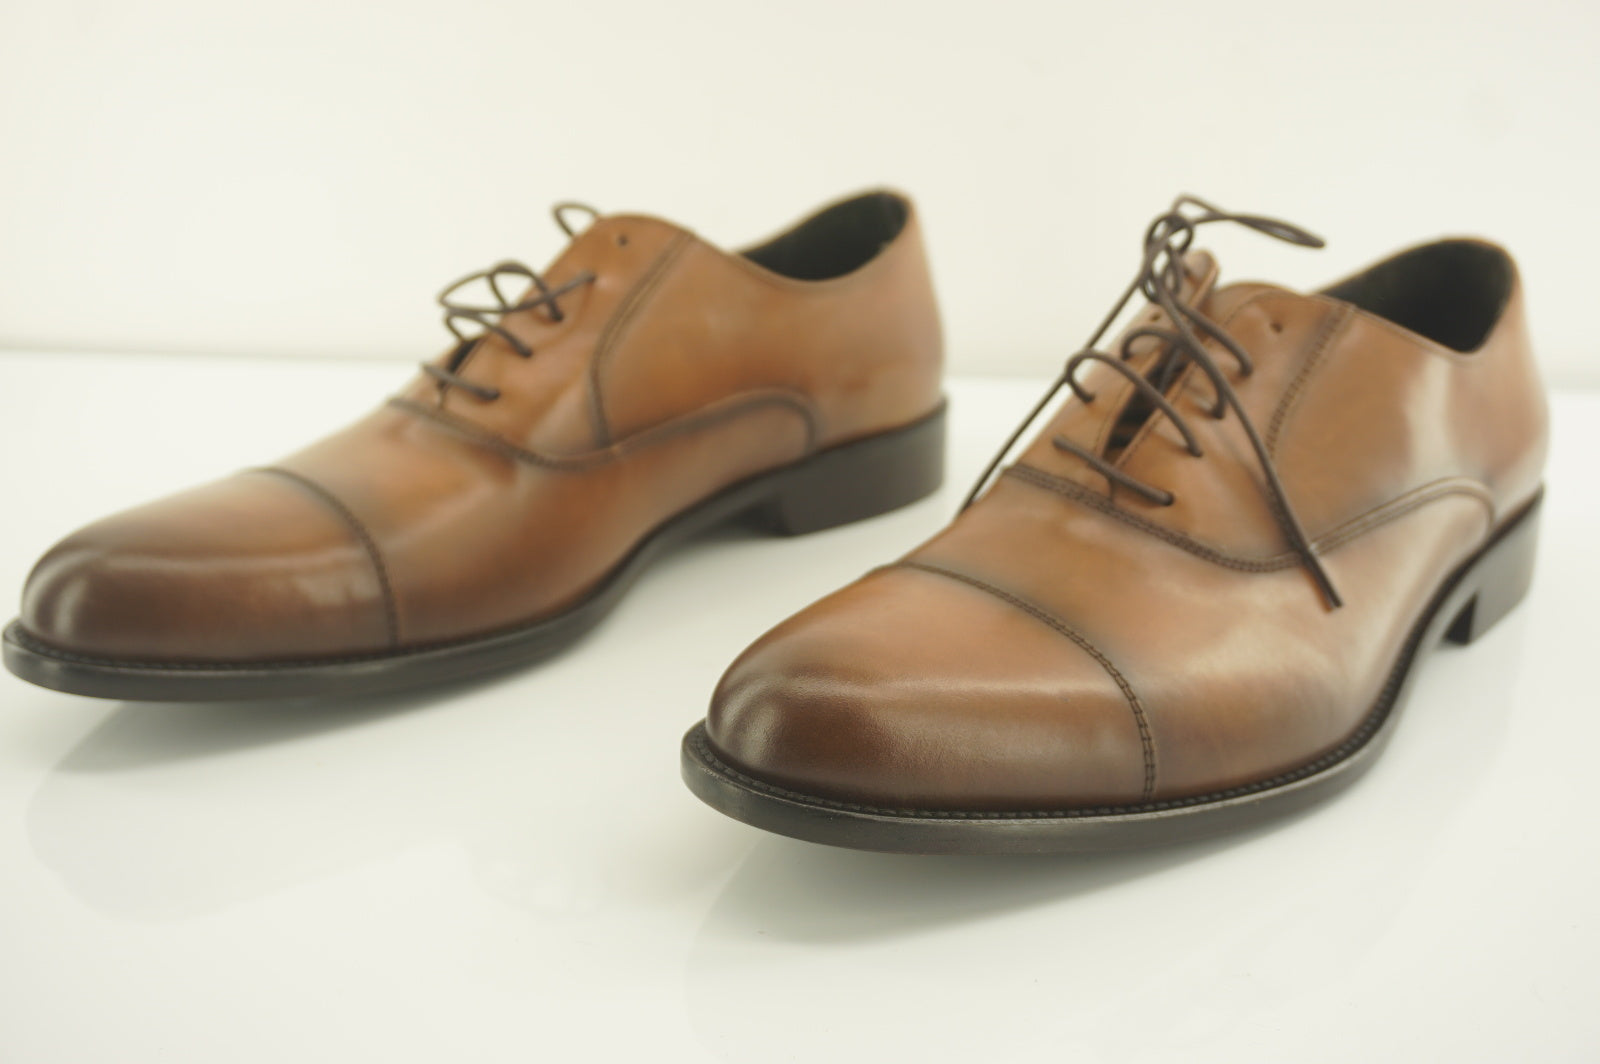 To Boot New York Caufield Men's Brown Leather Cap Toe Oxfords Size 11.5 D $395